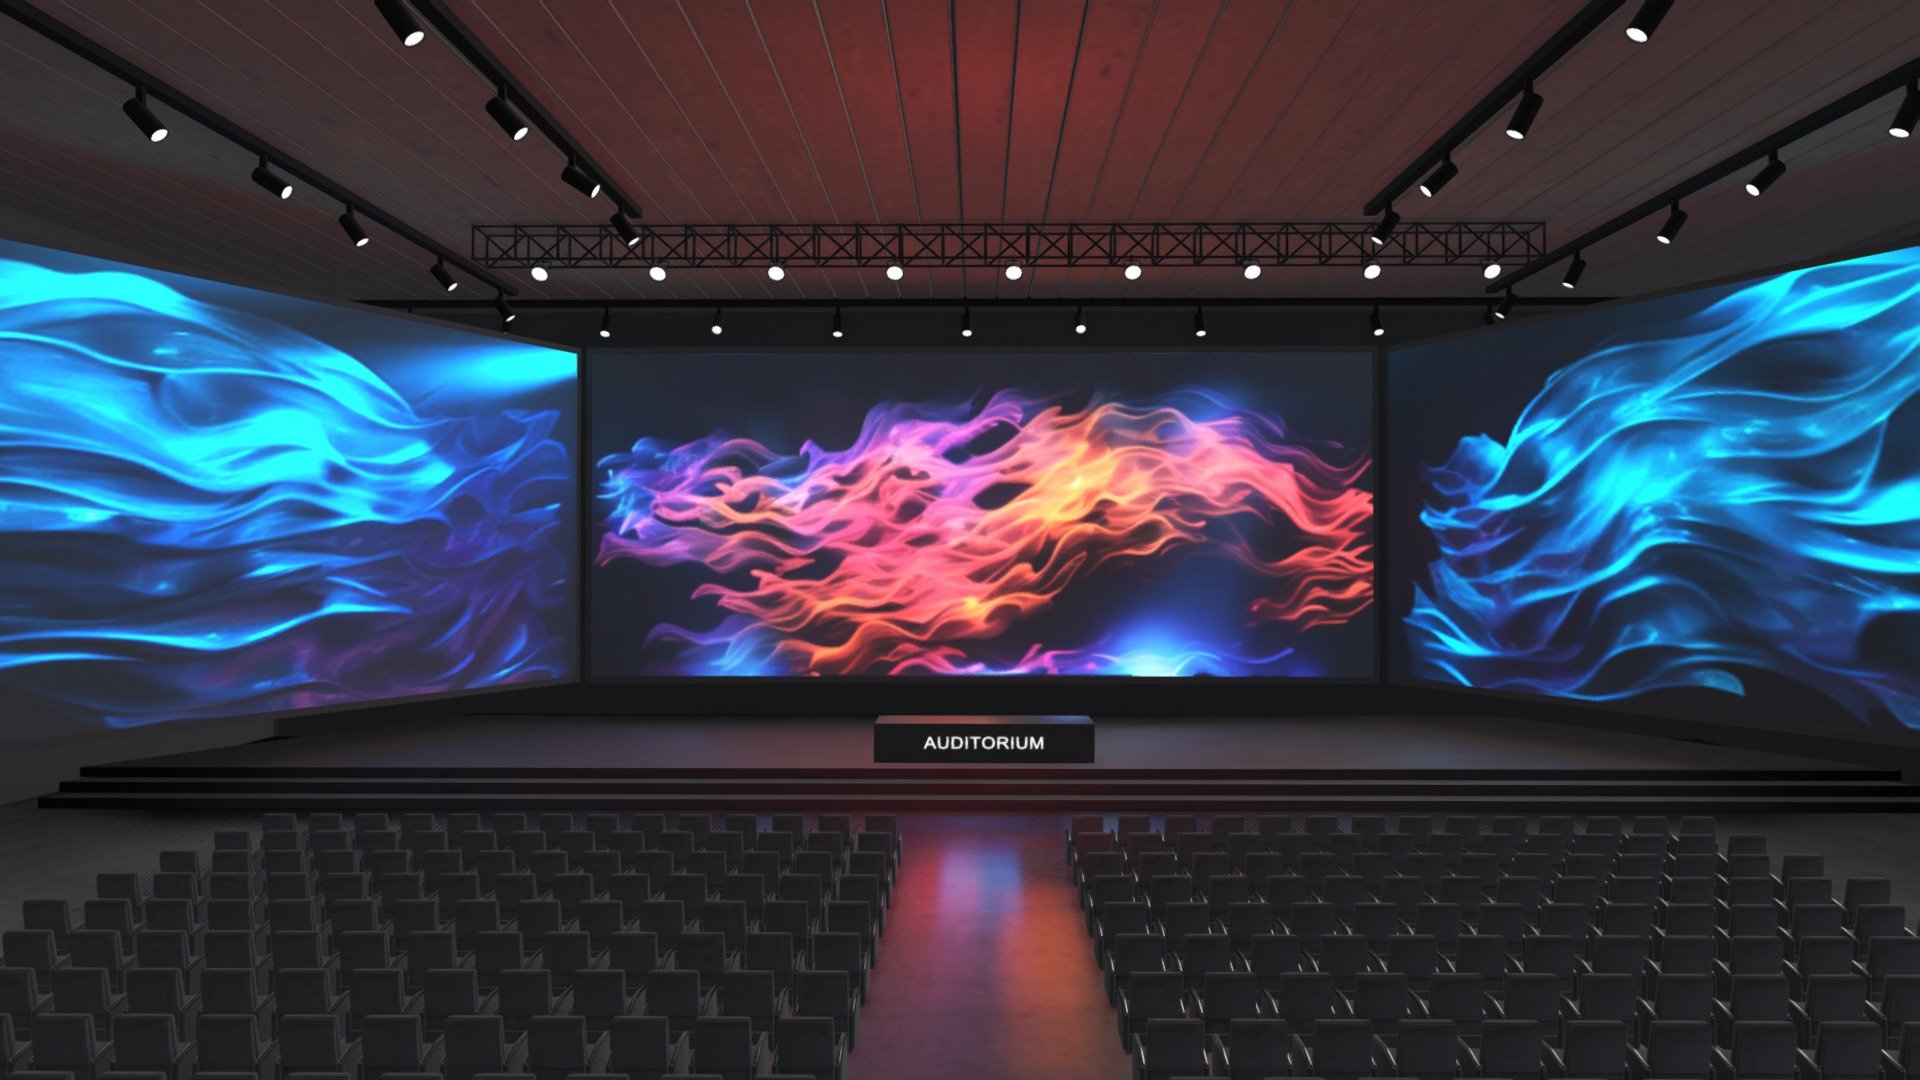 A large stage with giant screens and hundreds of audience seats.
Thre screens are displaying some futuristic chromatic waves, while you could still replace those textures with your own images.

Also, the texture in front of the podium which has the word &ldquo;auditorium